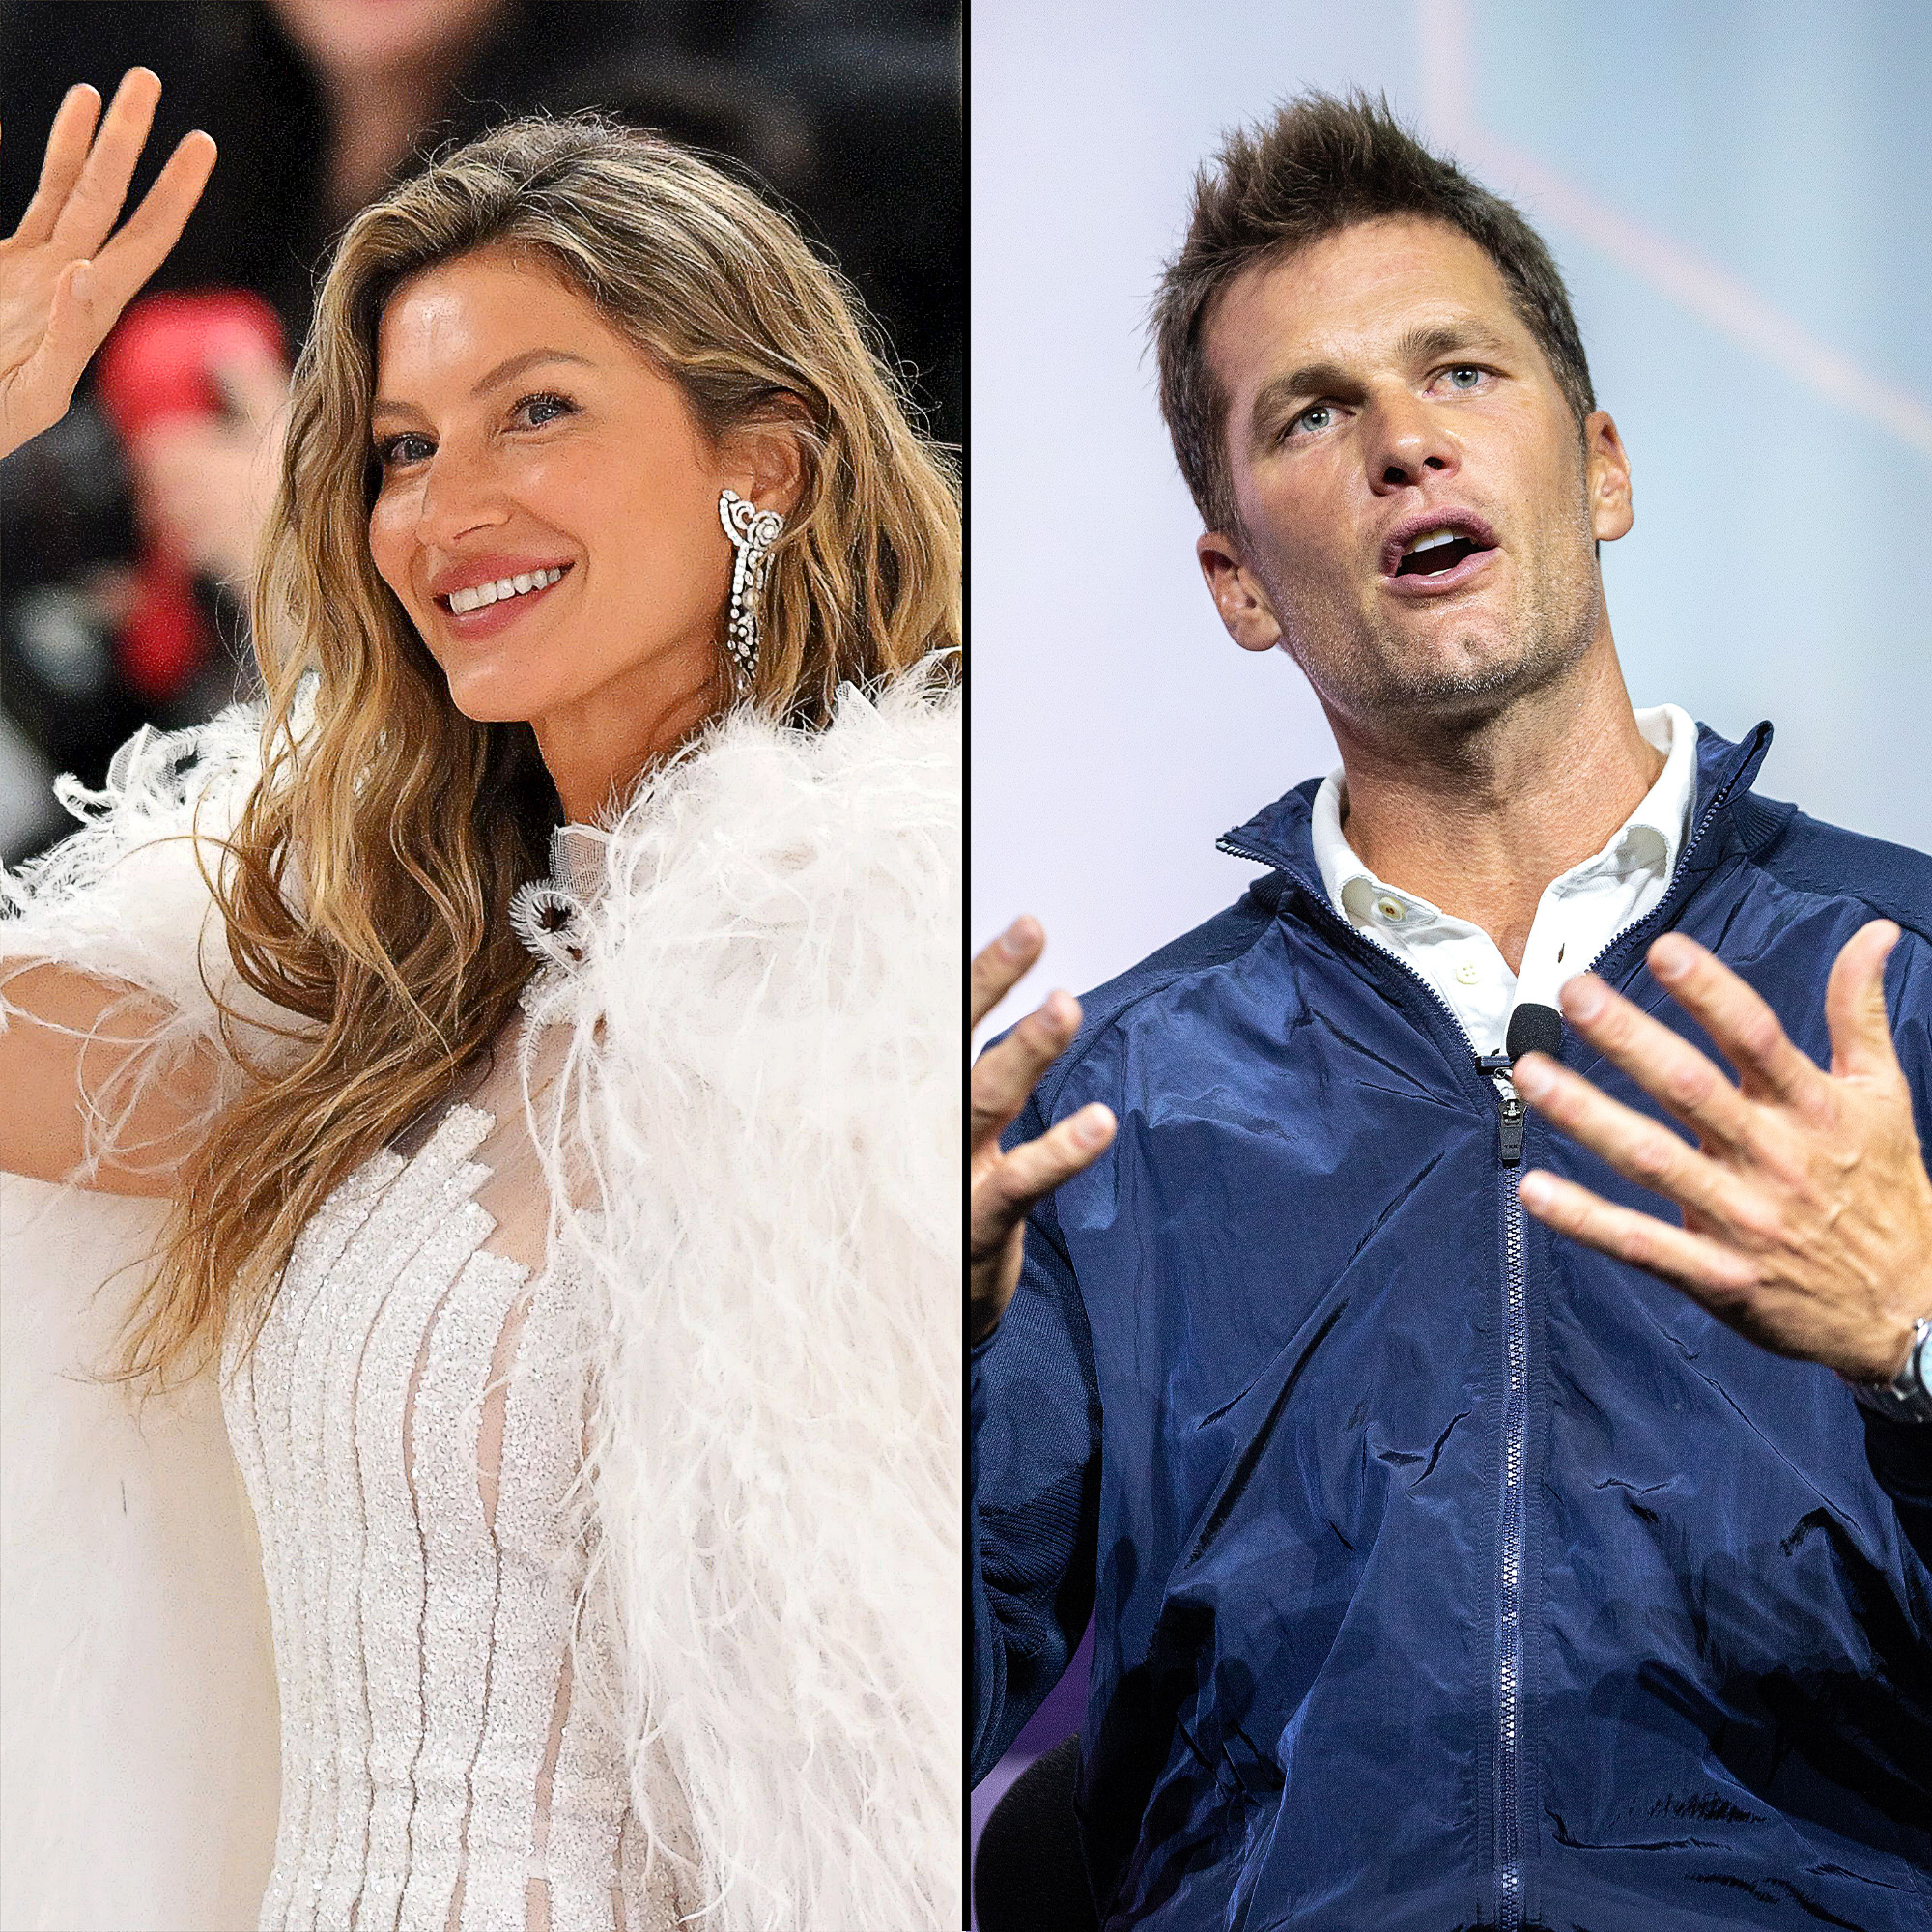 Gisele Bundchen Is 'Excited' for Future, 'Sad' About Tom Brady Divorce